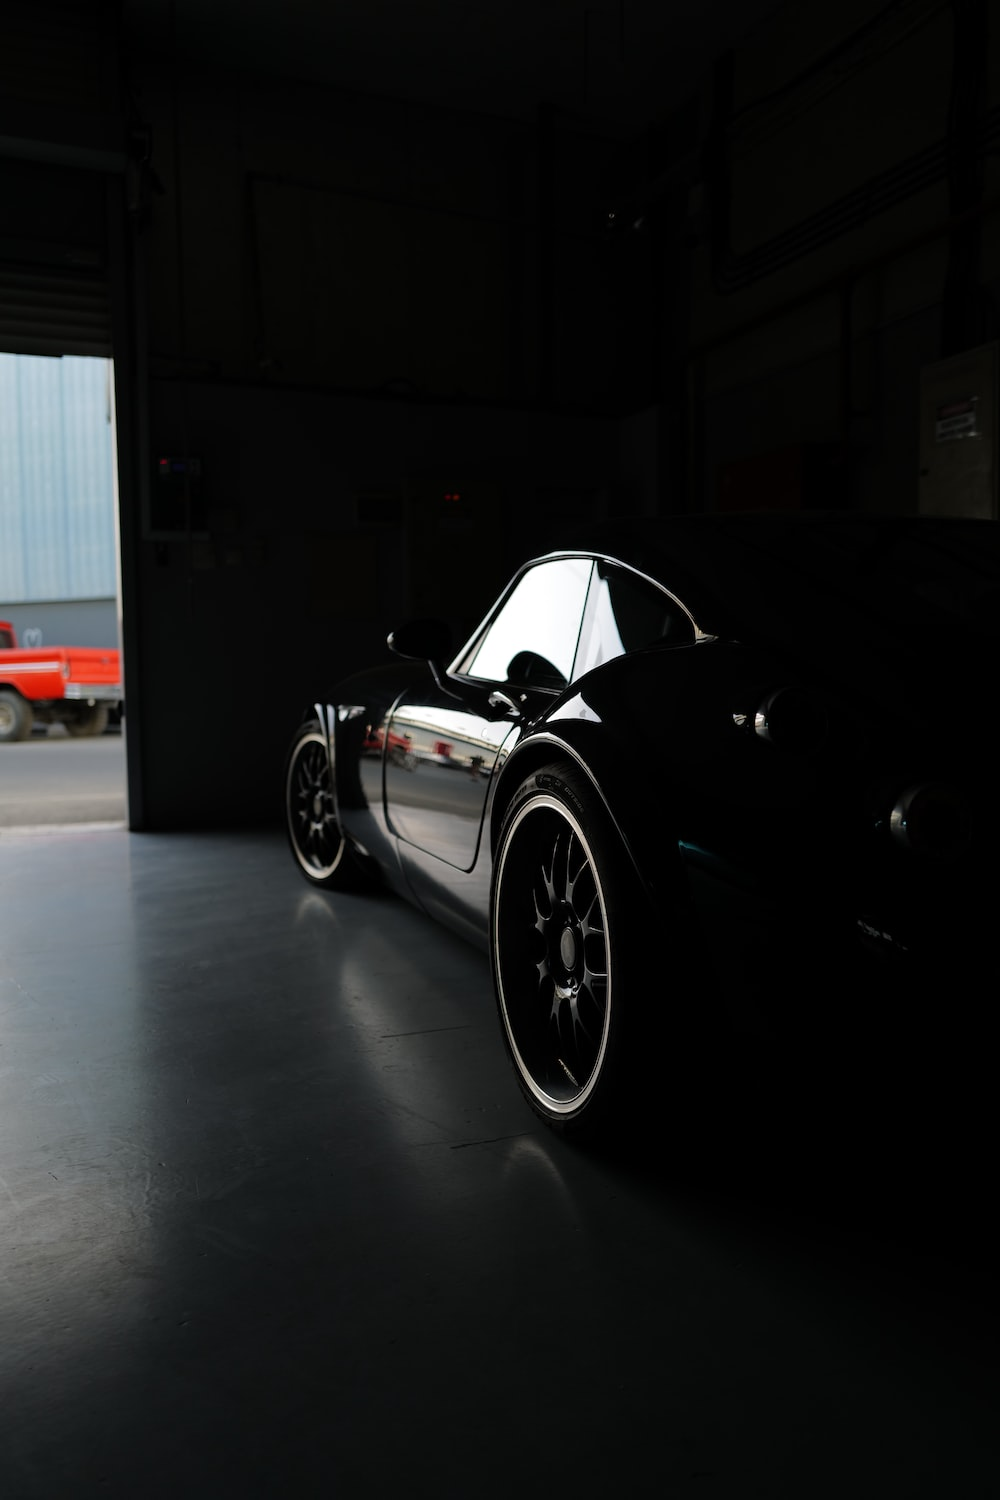 Light reflecting off a black car in a garage